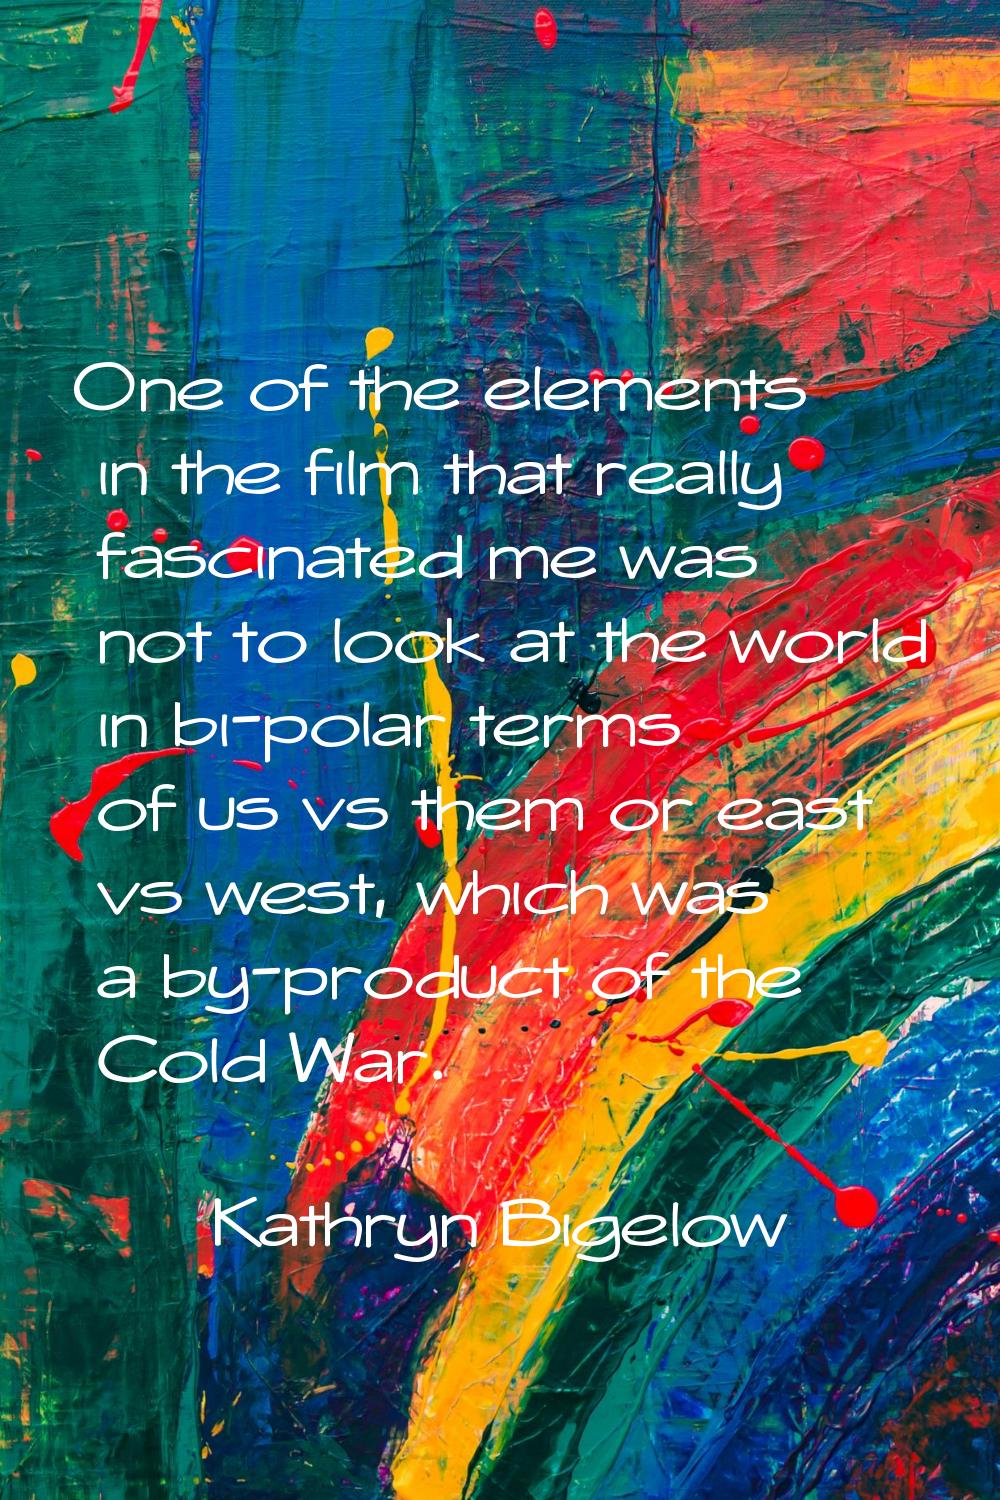 One of the elements in the film that really fascinated me was not to look at the world in bi-polar 